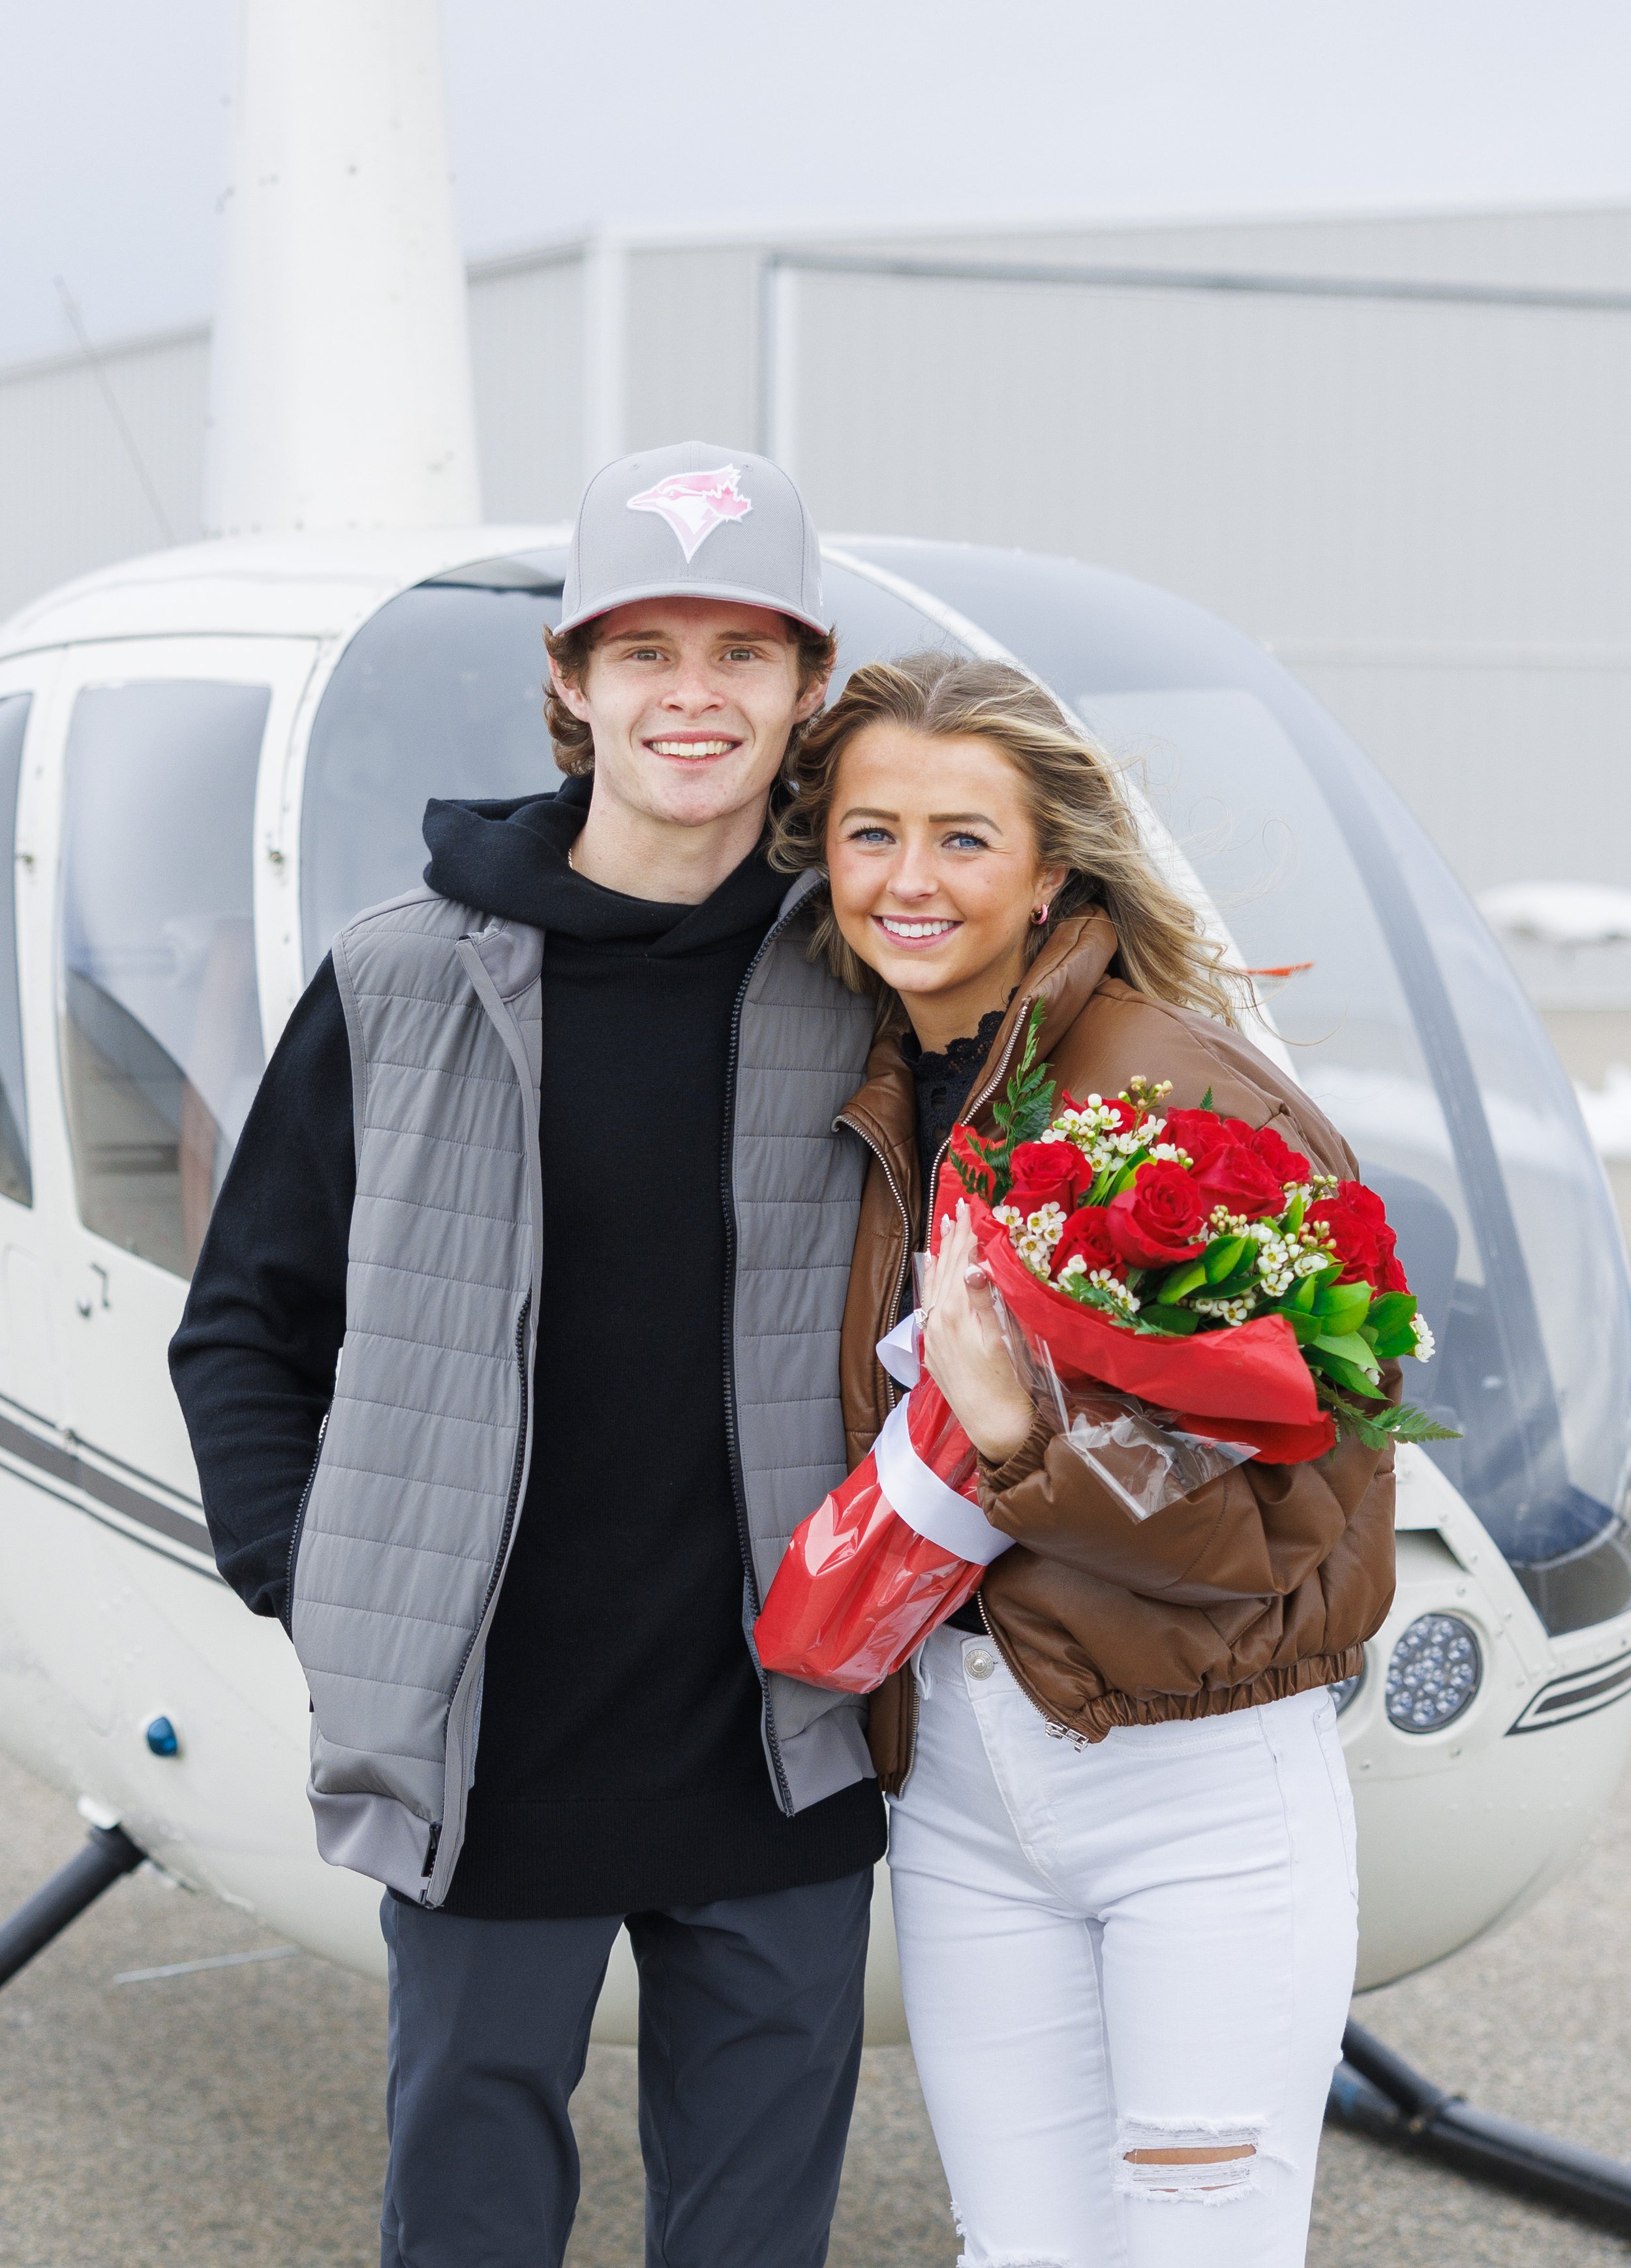  Savanna Richardson Photography captures a happy couple with red roses and a helicopter after the proposal. cute helicopter proposals photographer for the proposal in Utah #SavannaRichardsonPhotography #SavannaRichardsonEngagements #utahproposals #he